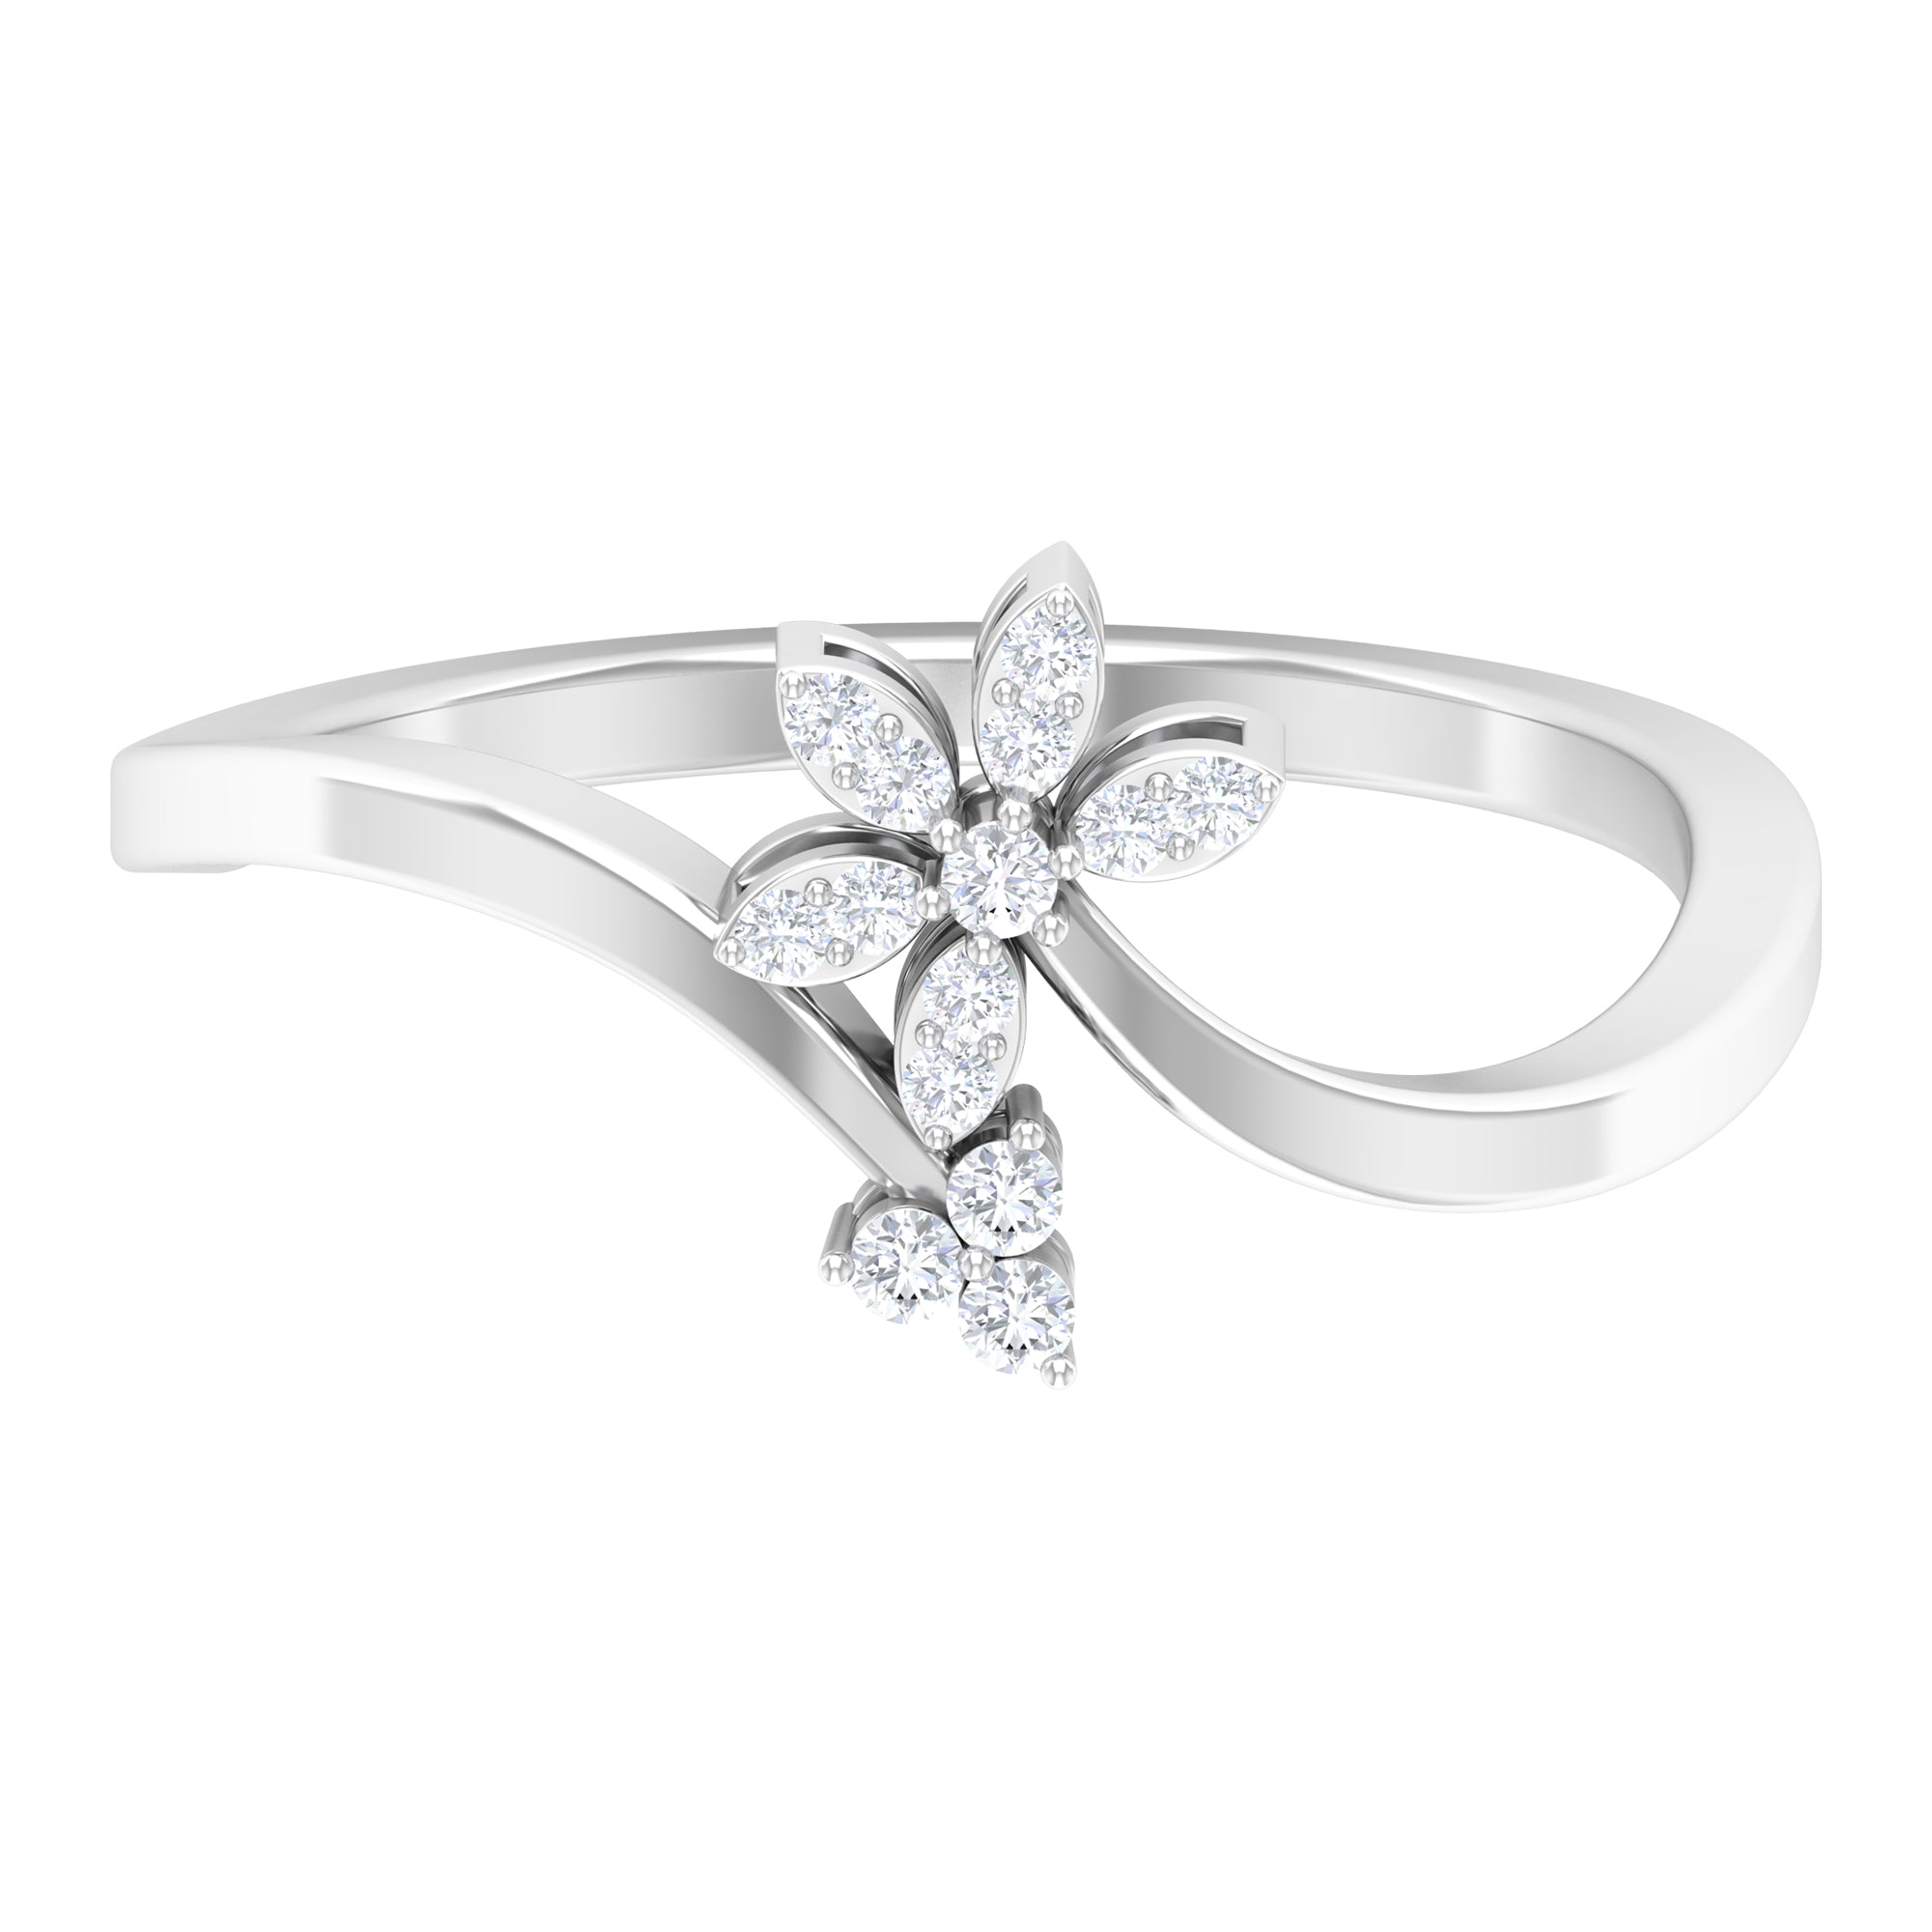 Diamond Floral Ring with Curved Shank Diamond - ( HI-SI ) - Color and Clarity - Rosec Jewels